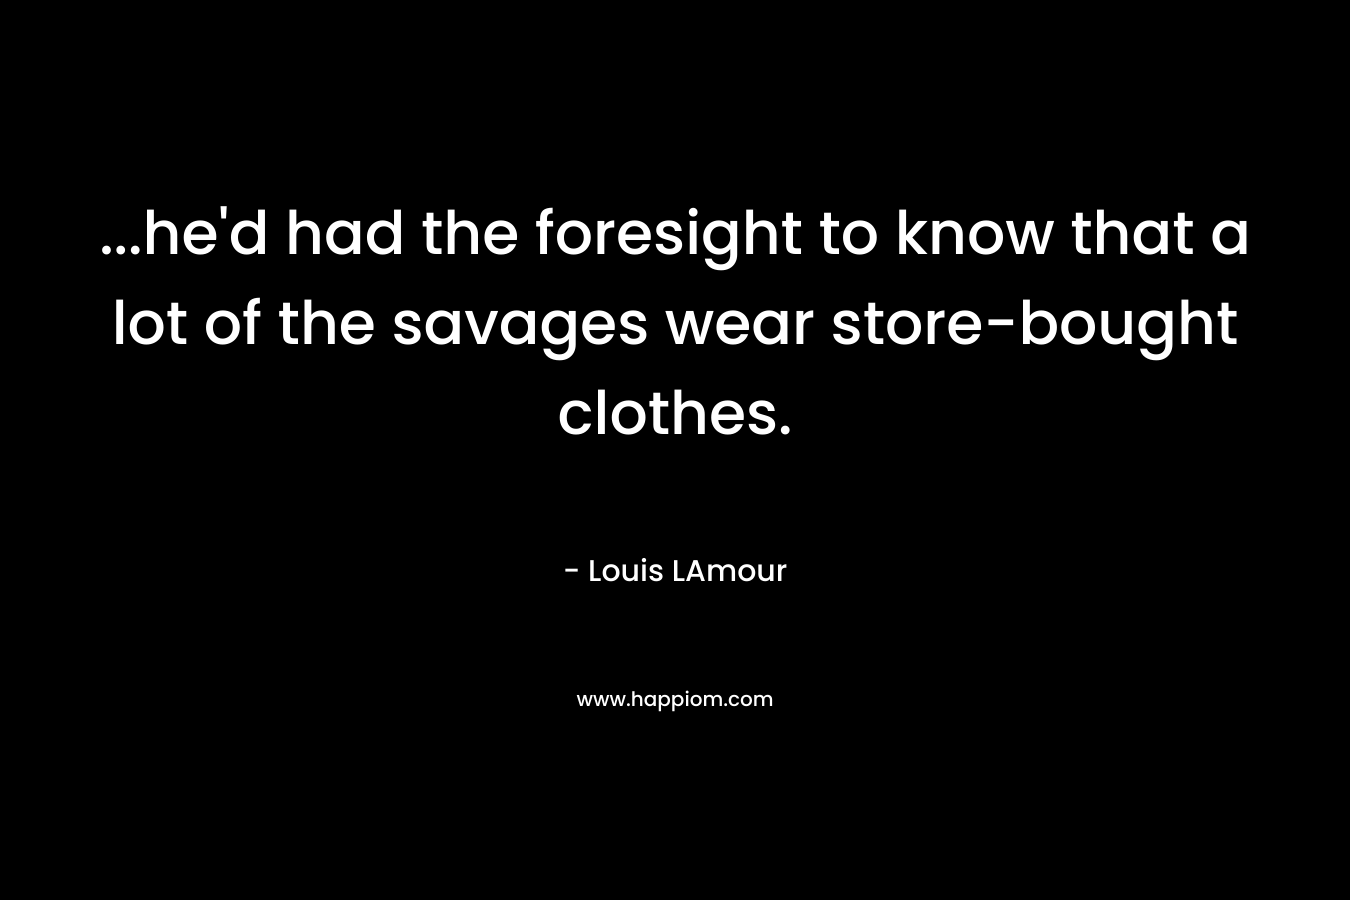 ...he'd had the foresight to know that a lot of the savages wear store-bought clothes.